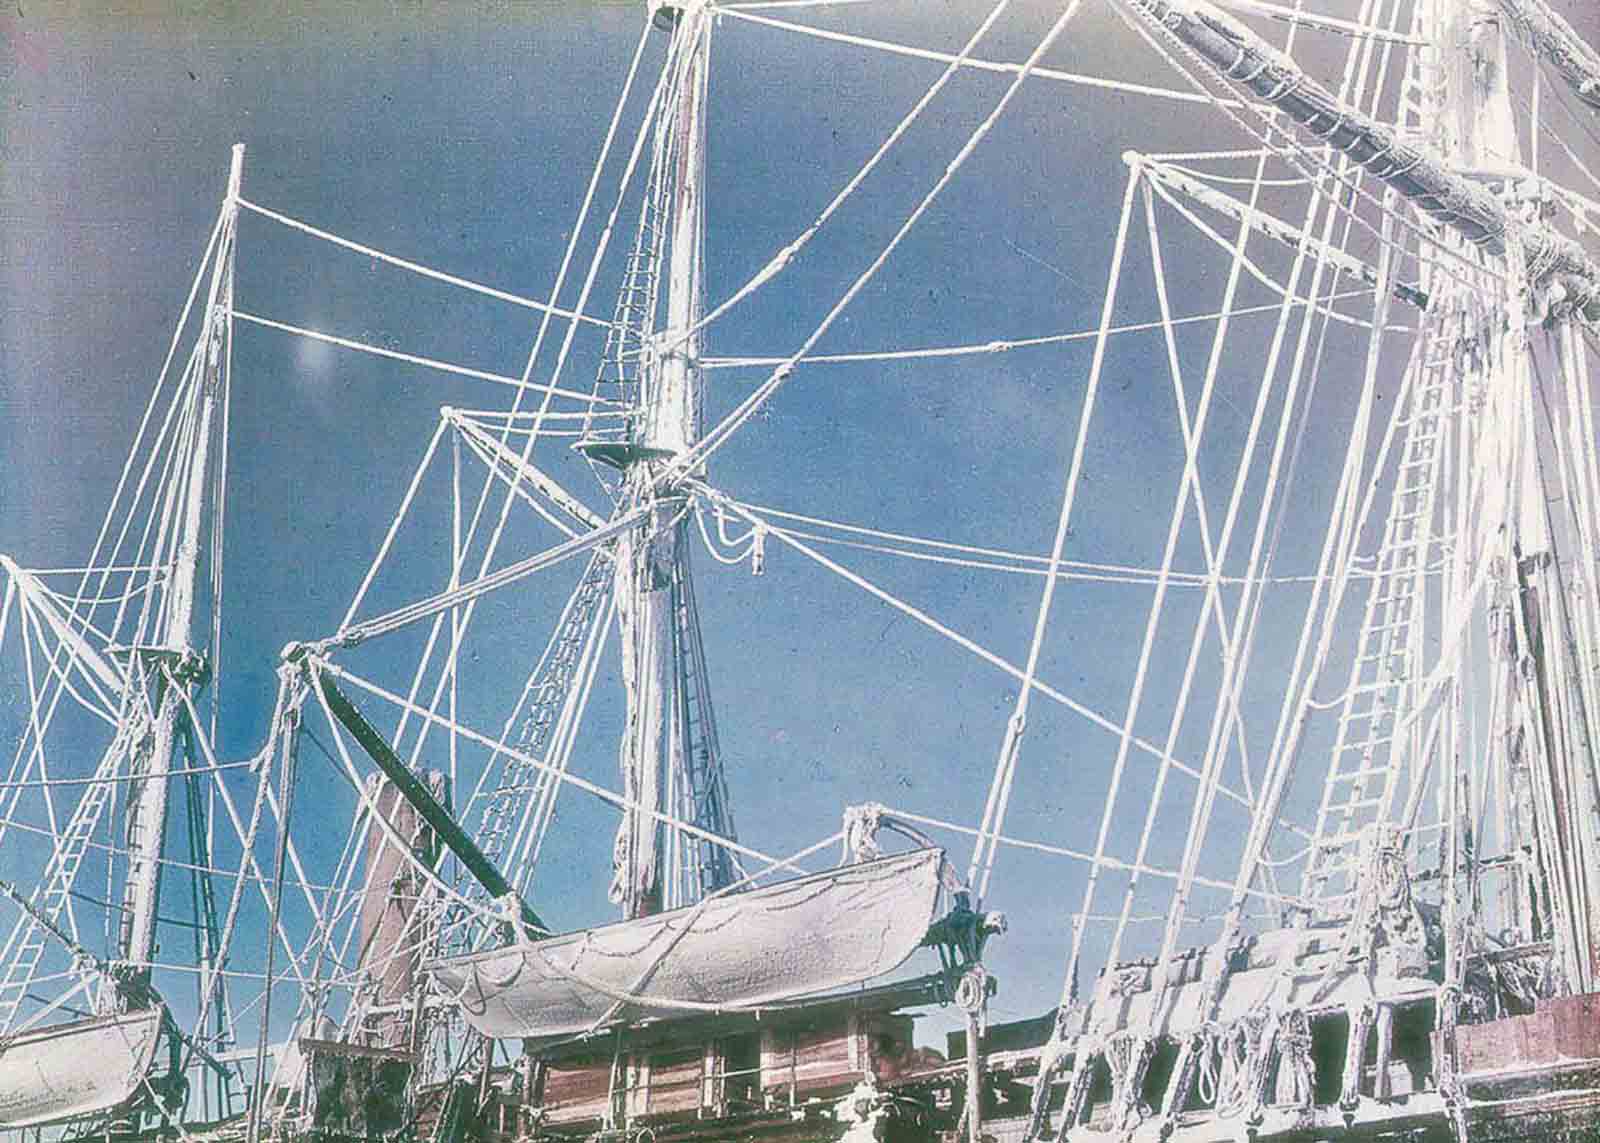 The rigging of the Endurance, coated in rime.